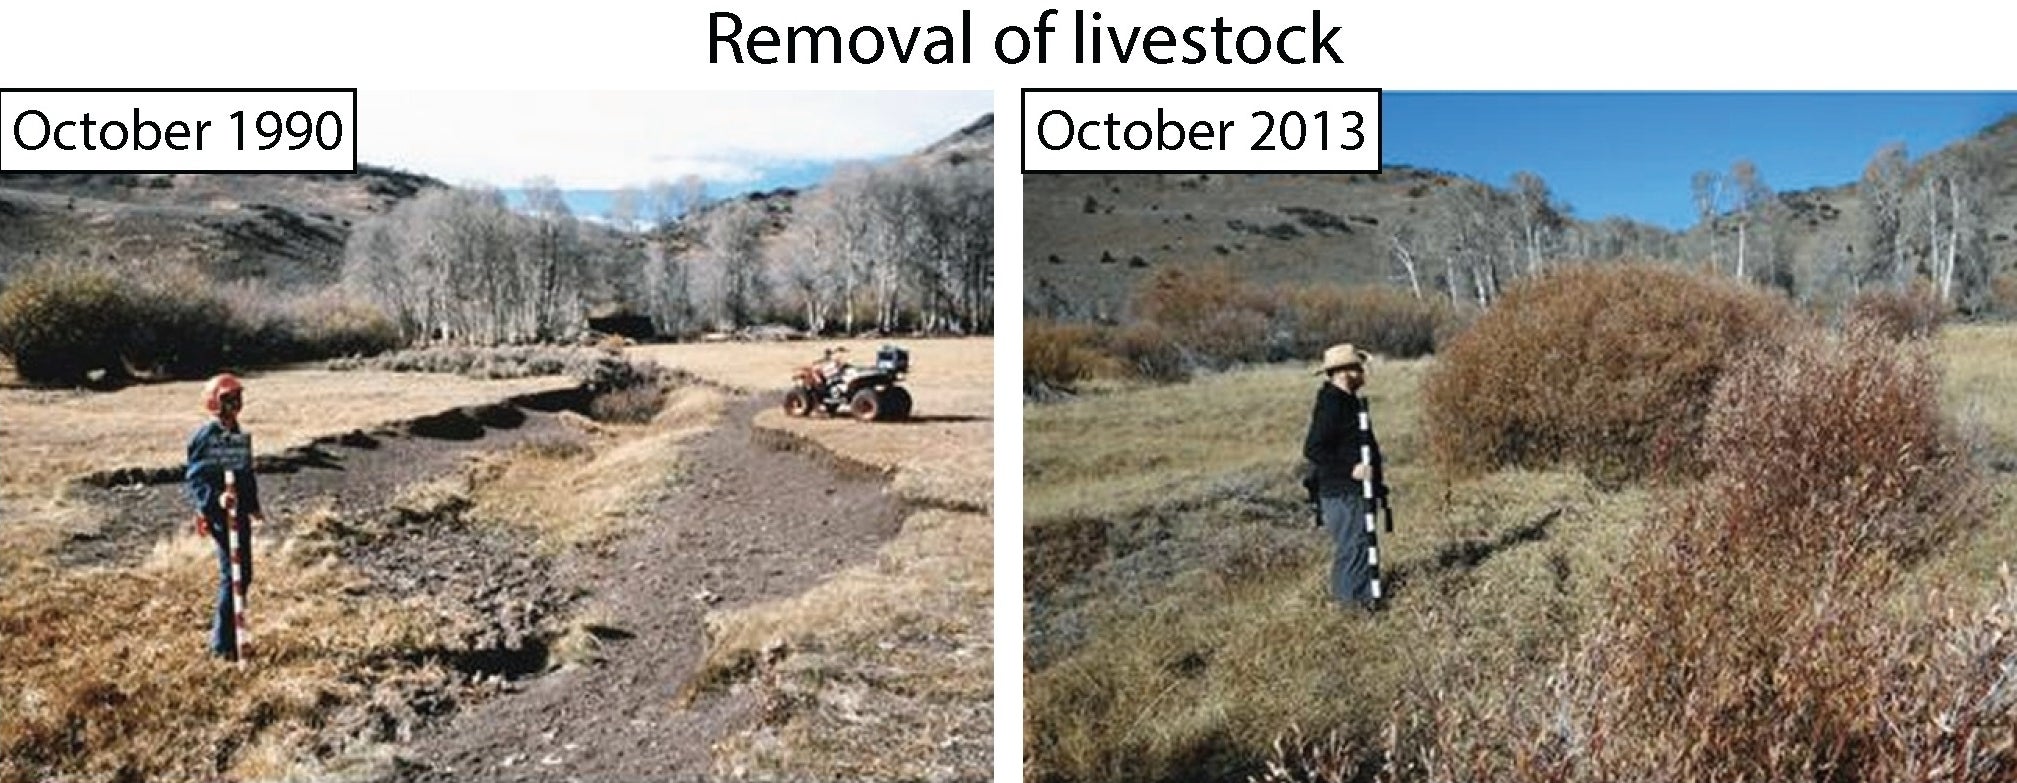 Regrowth of plants on riverbanks on public lands with before and after comparison